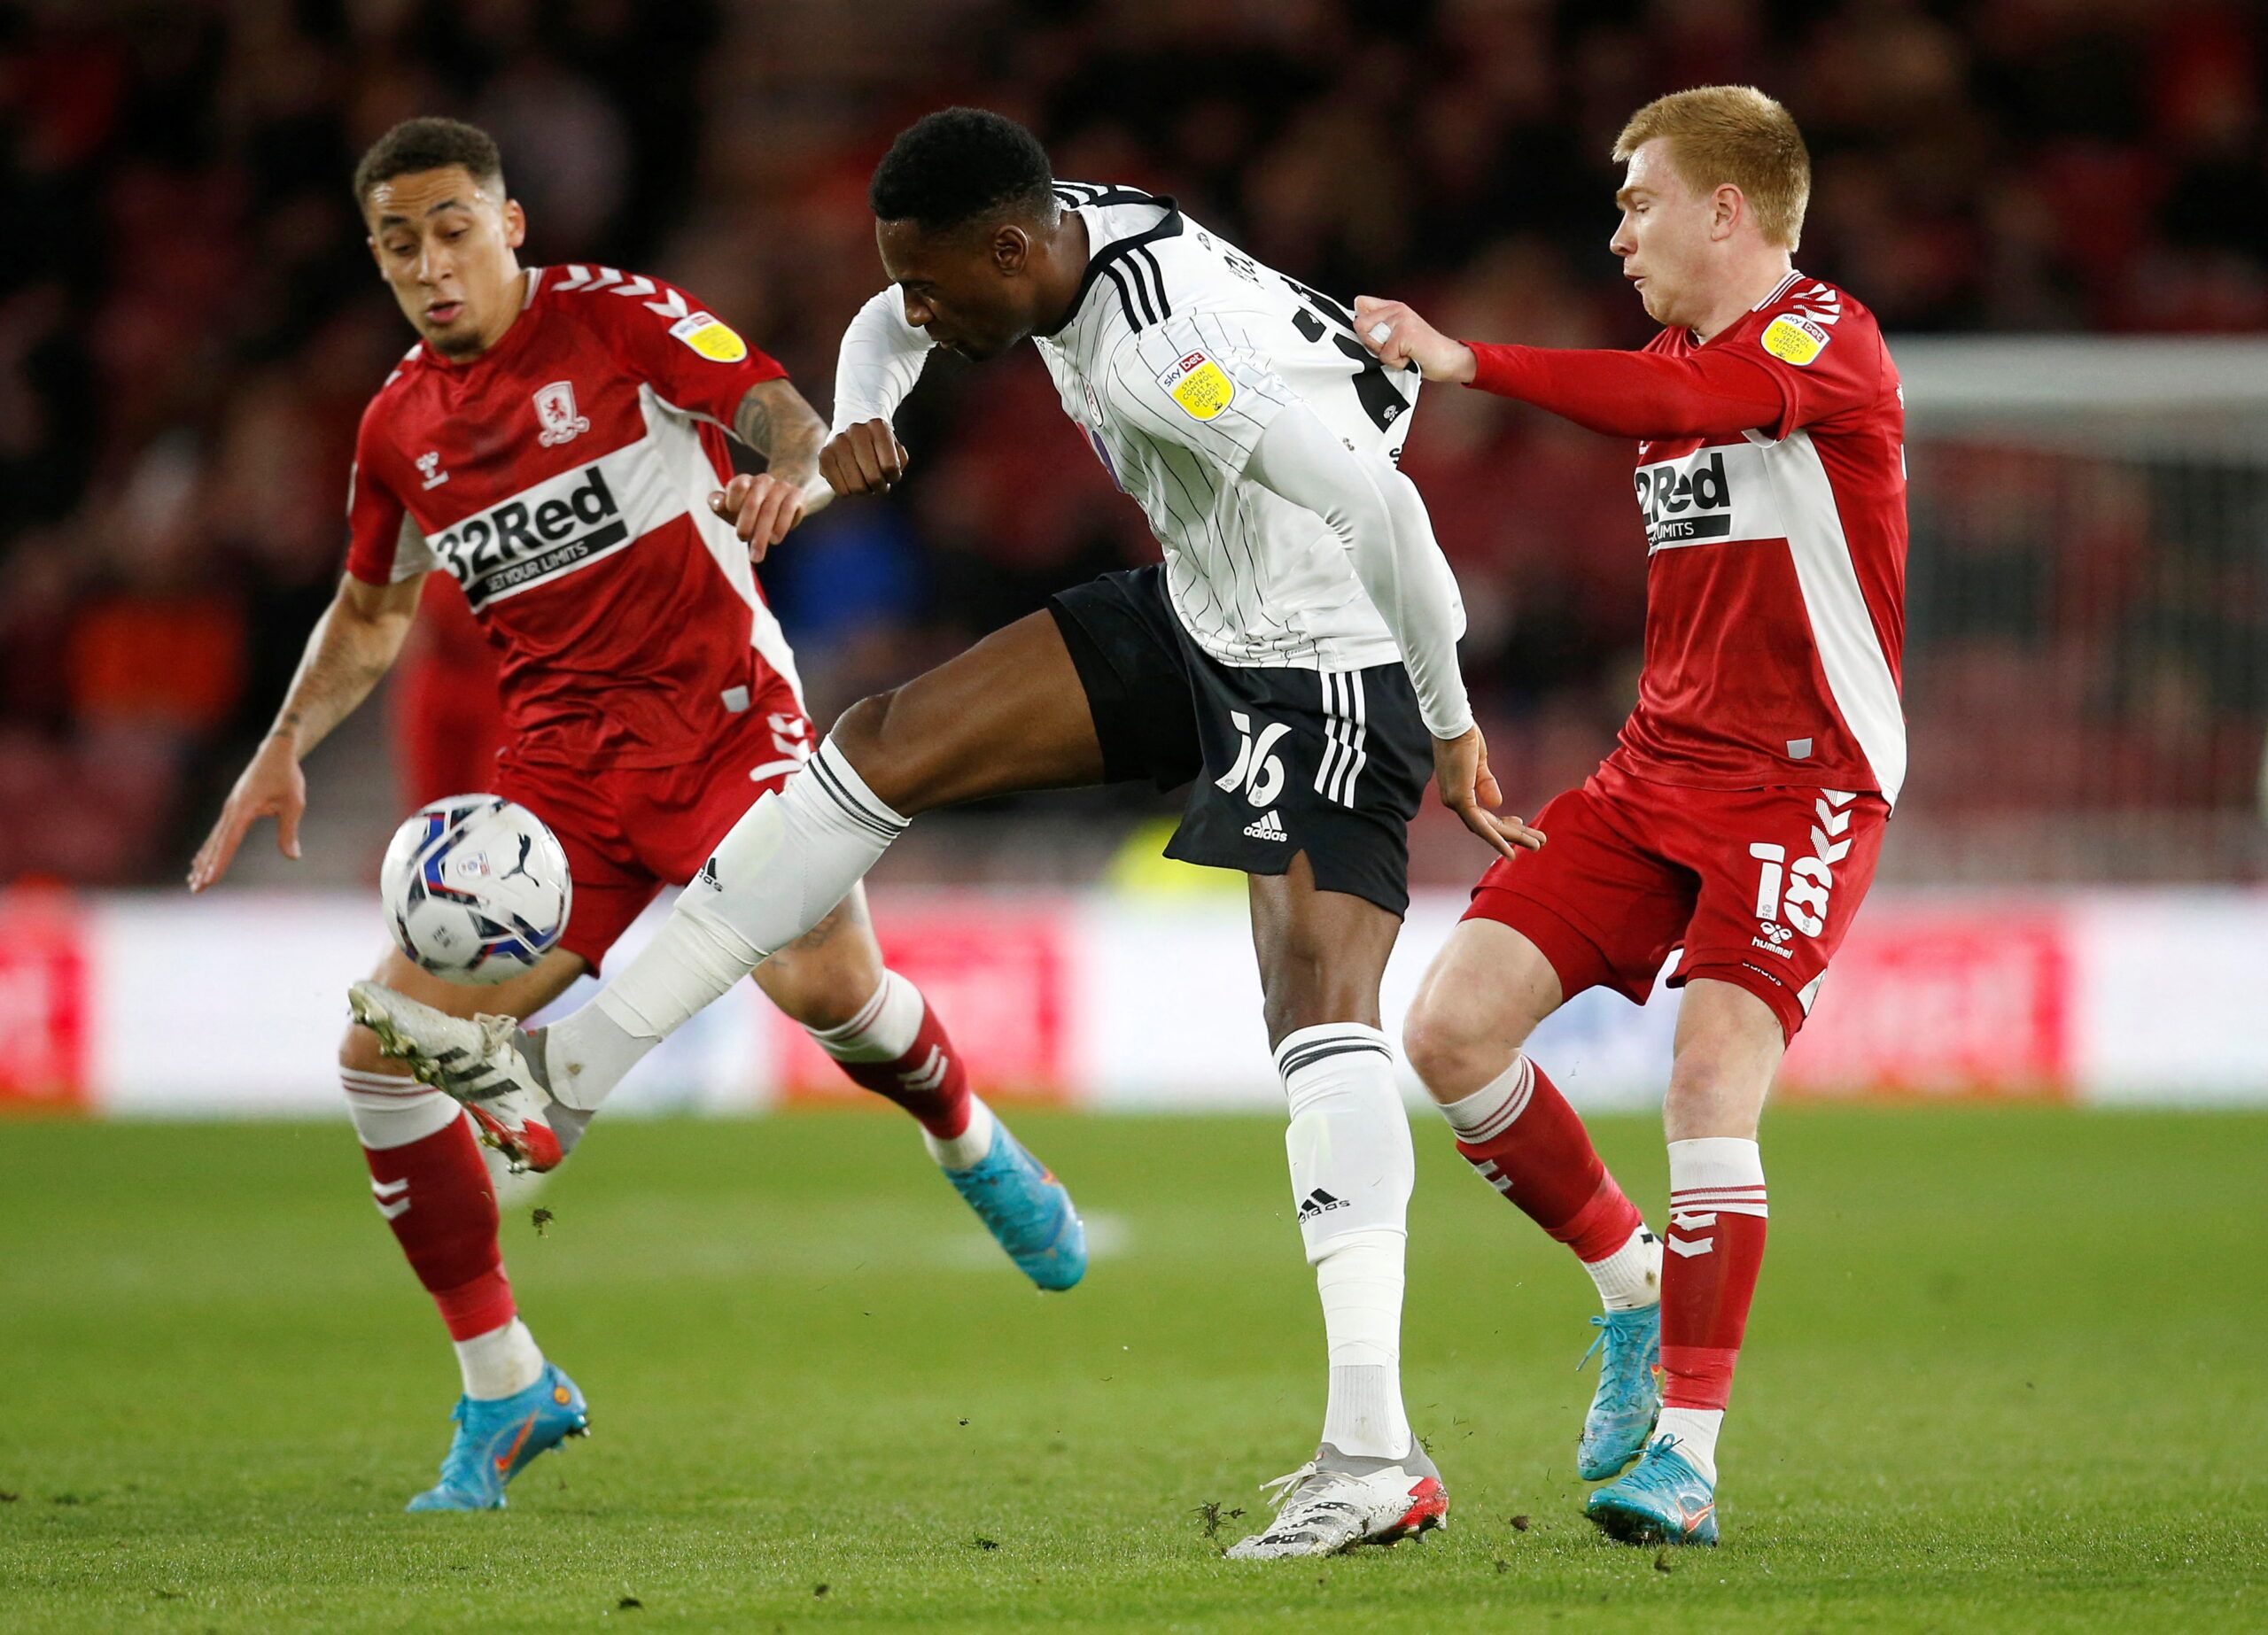 Soccer Football - Championship - Middlesbrough v Fulham - Riverside Stadium, Middlesbrough, Britain - April 6, 2022 Fulham's Tosin Adarabioyo in action with Middlesbrough's Marcus Tavernier and Duncan Watmore  Action Images/ Ed Sykes  EDITORIAL USE ONLY. No use with unauthorized audio, video, data, fixture lists, club/league logos or 